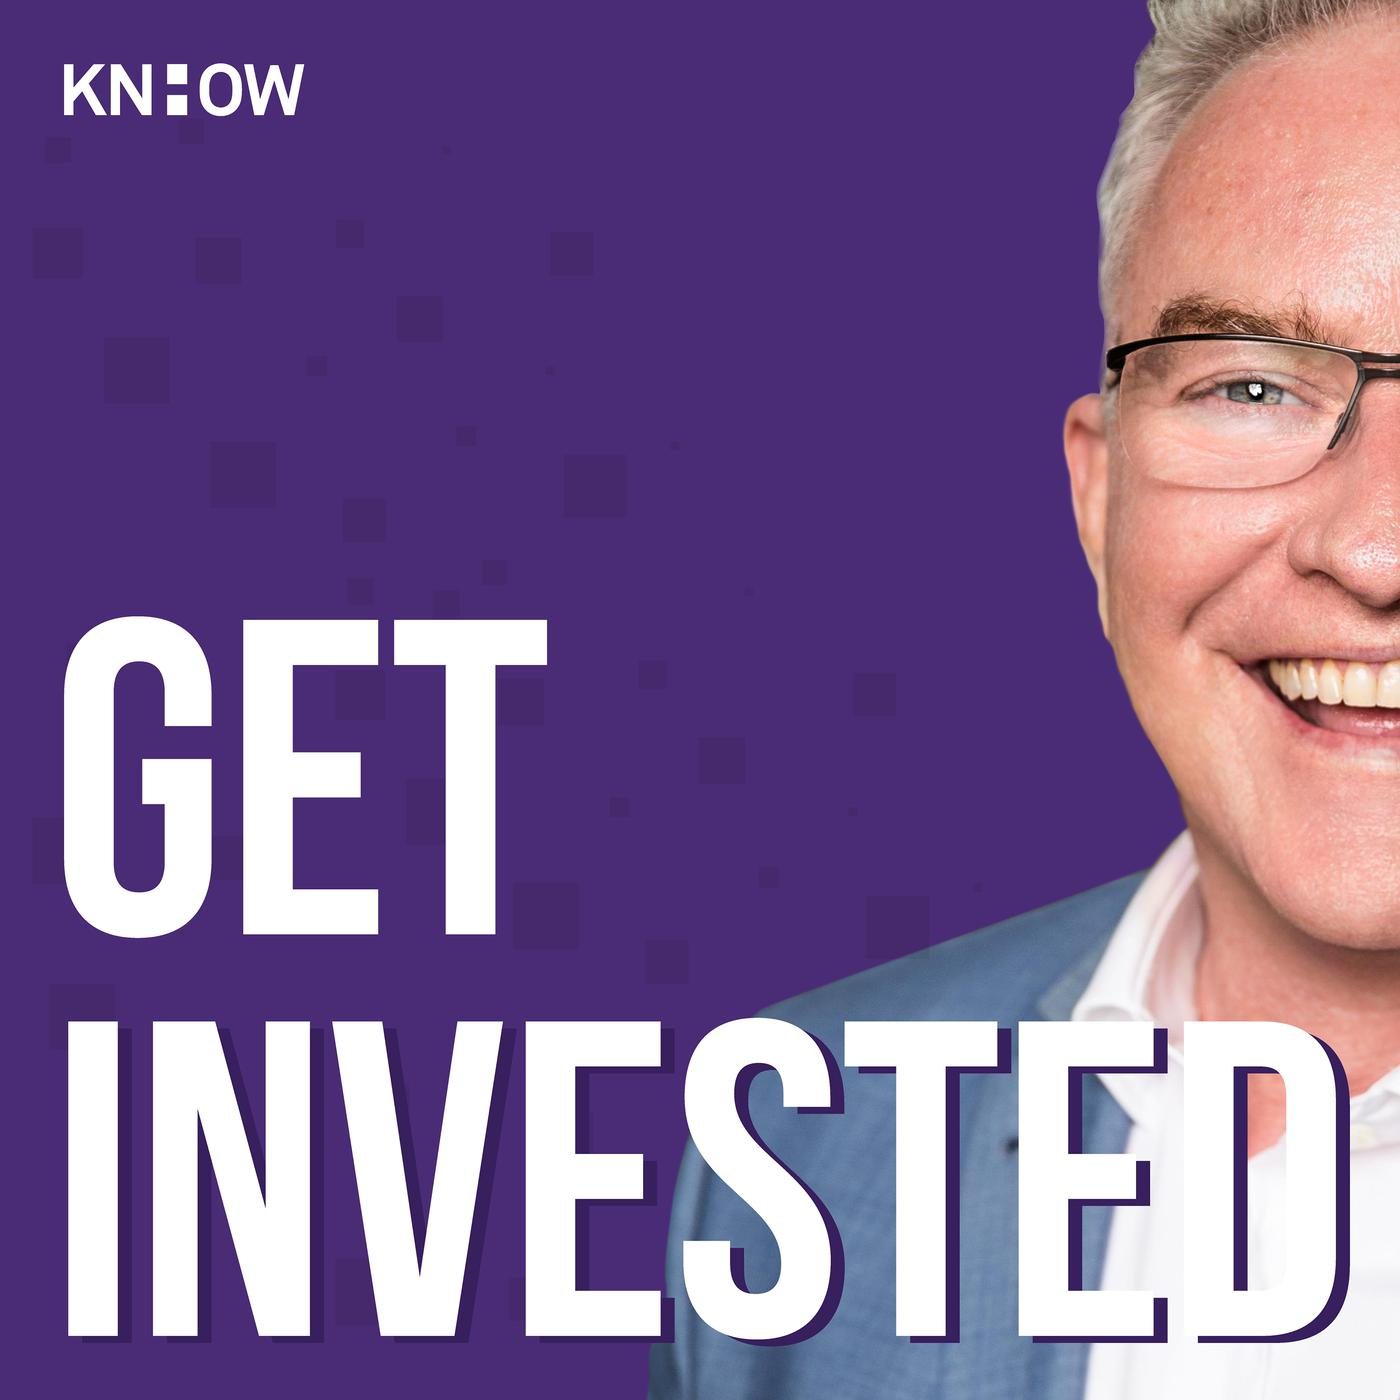 Get Invested: Paul Martin's Investor Story on never ever giving up